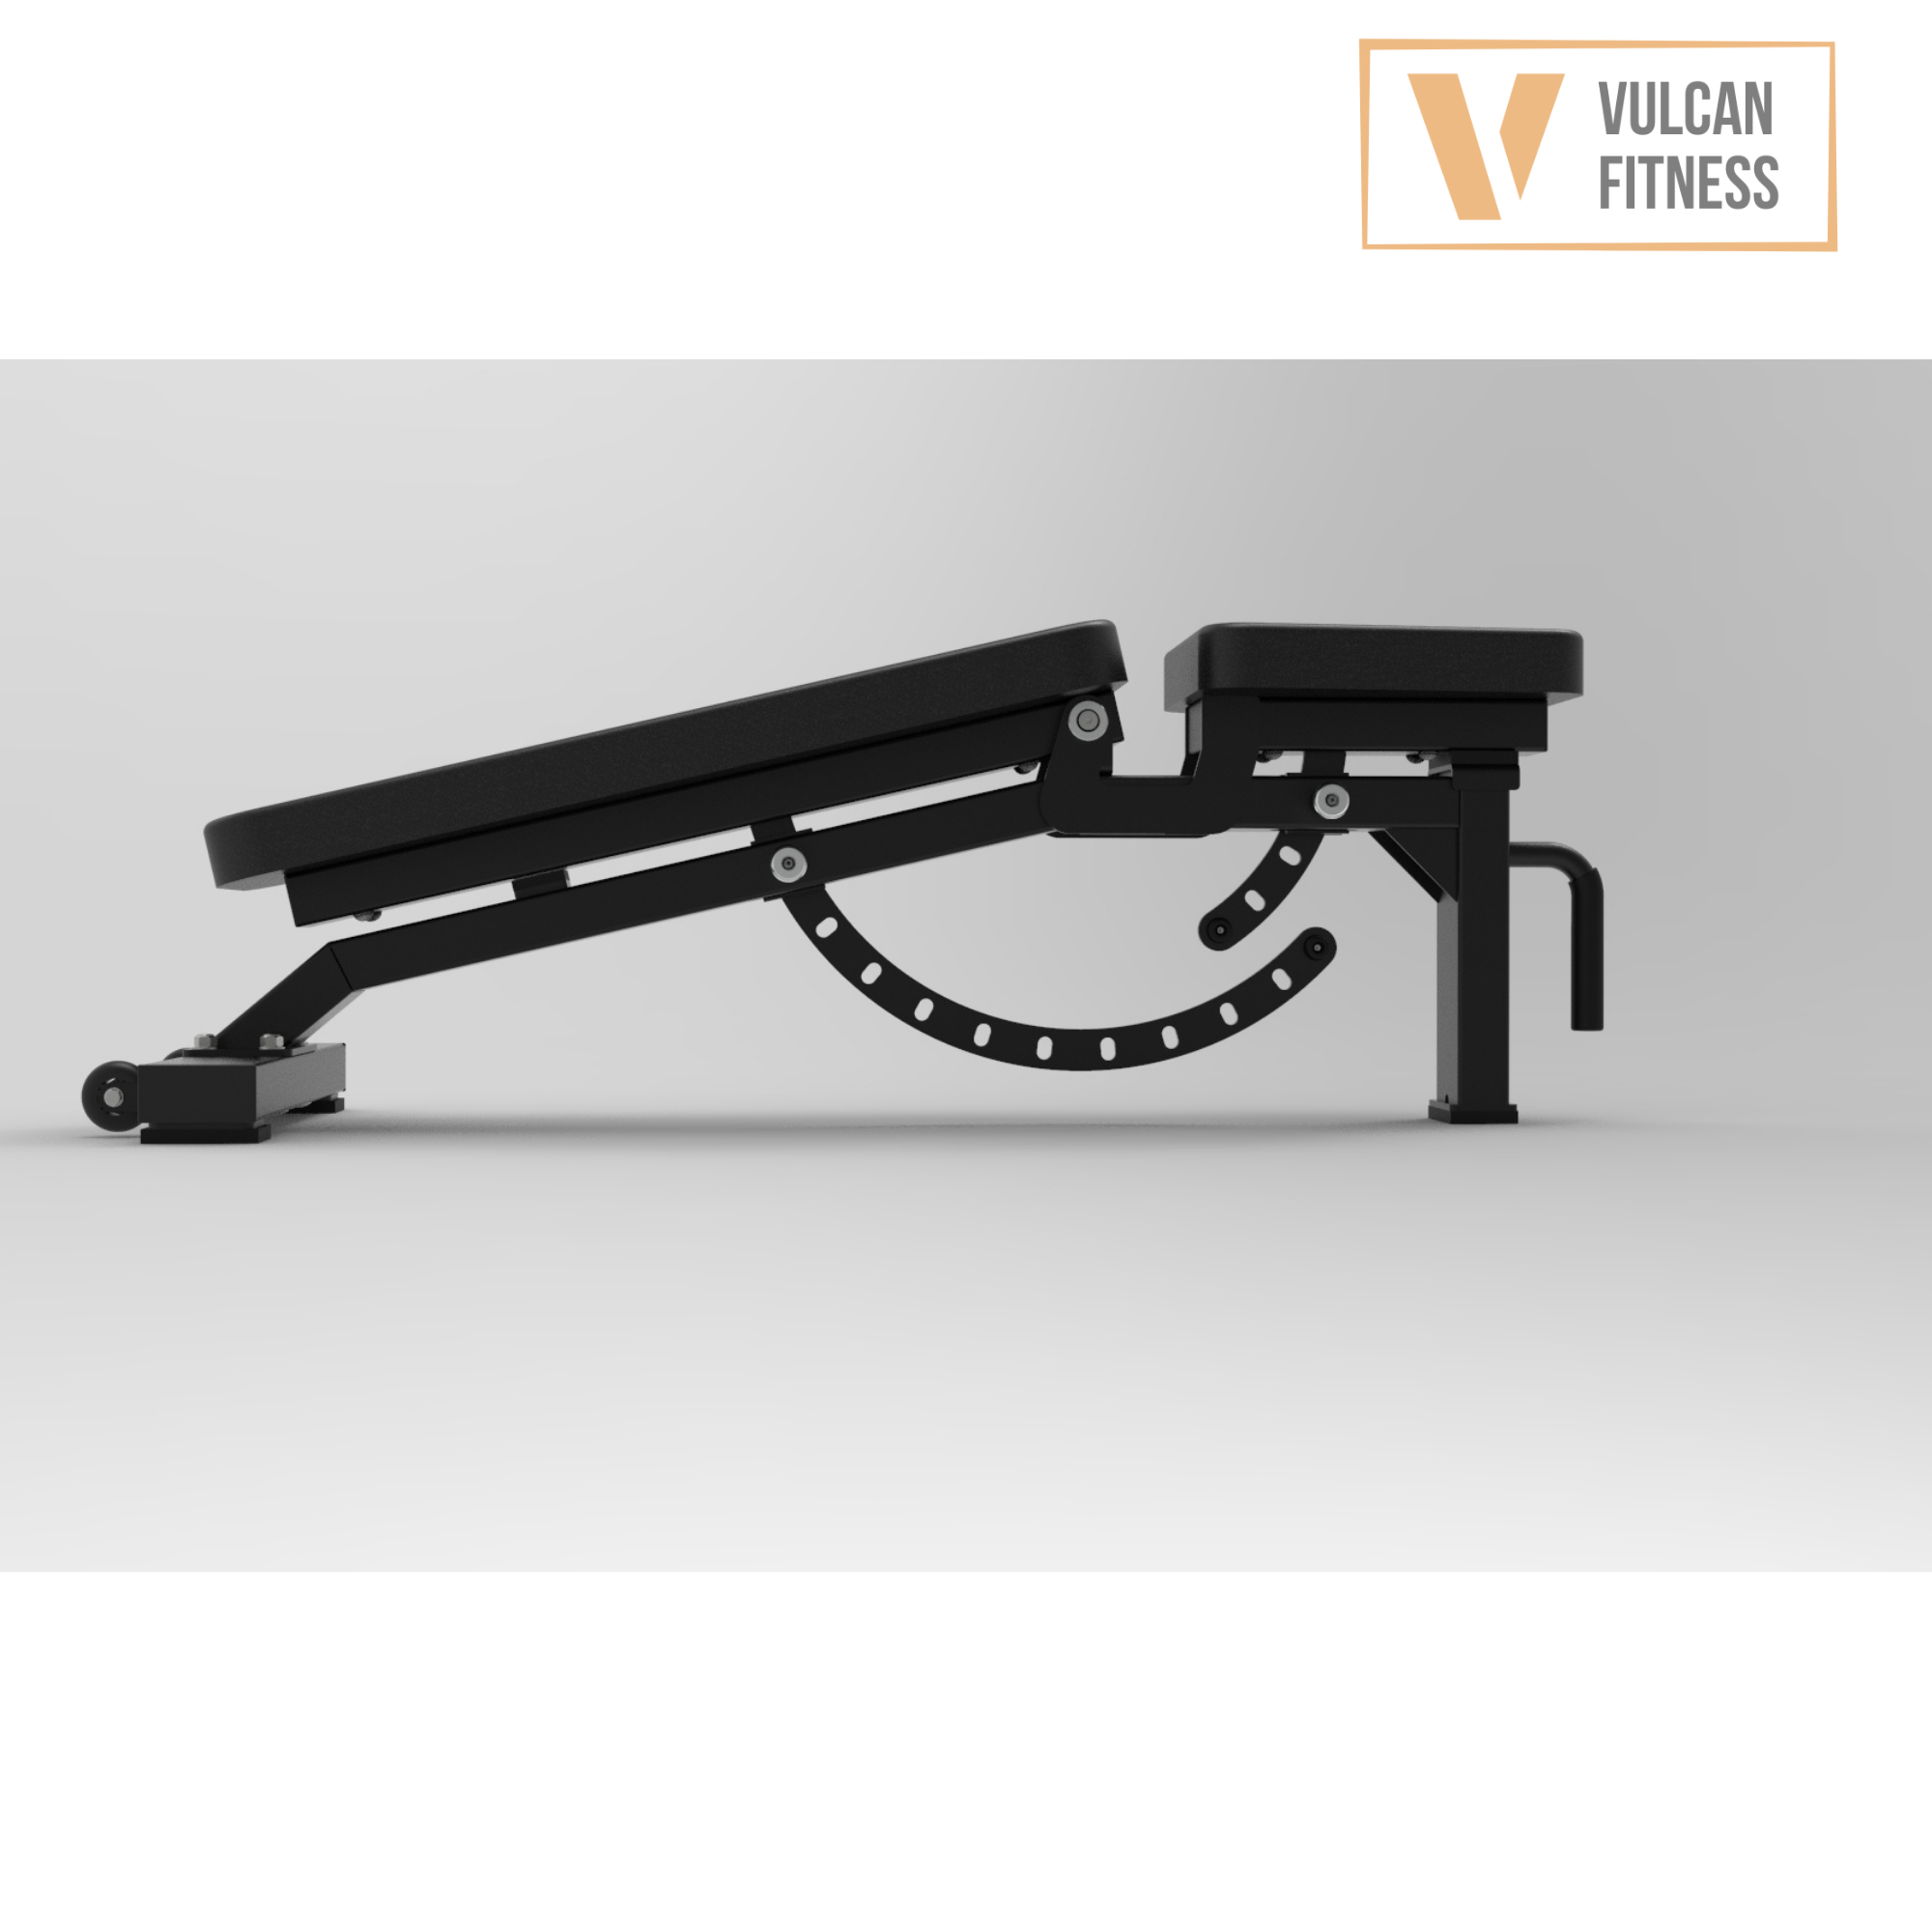 VULCAN Commercial Power Cage, Olympic Barbell, 100kg Black Bumper Weight Plates & Adjustable Bench | IN STOCK